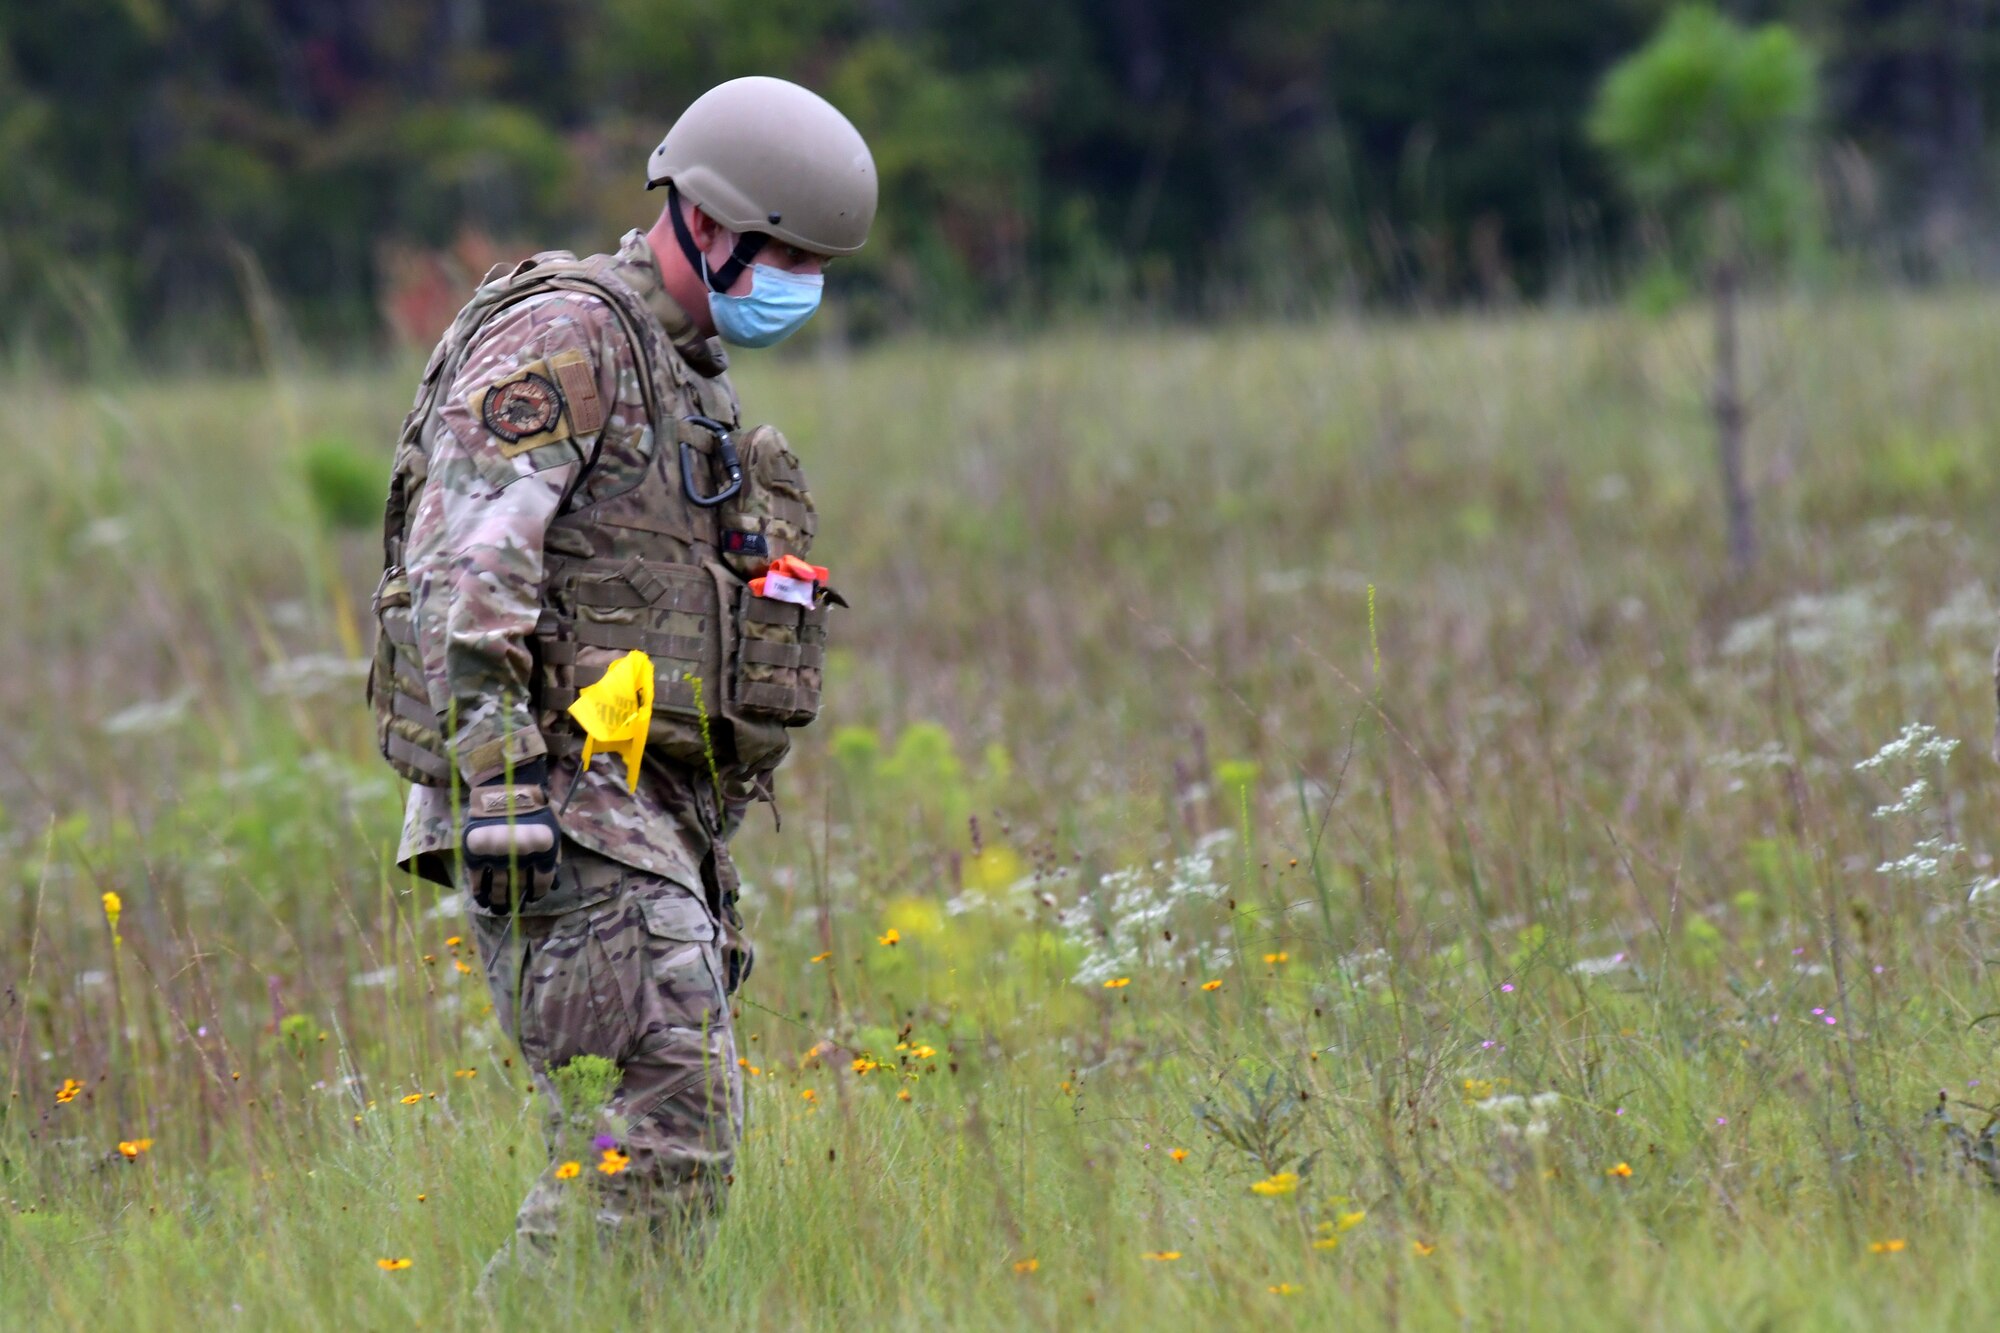 Staff Sgt. Derek Miller, 94th EOD Flight technician, searches an area for any explosive material at Fort Stewart, Georgia, Sept. 16, 2020. Throughout the exercise, members went through numerous tasks such as working with electric demolition procedures, non-electric demolition procedures, demolition shape charges and cratering charges. (U.S. Air Force photo by Airman 1st Class Kendra A. Ransum)